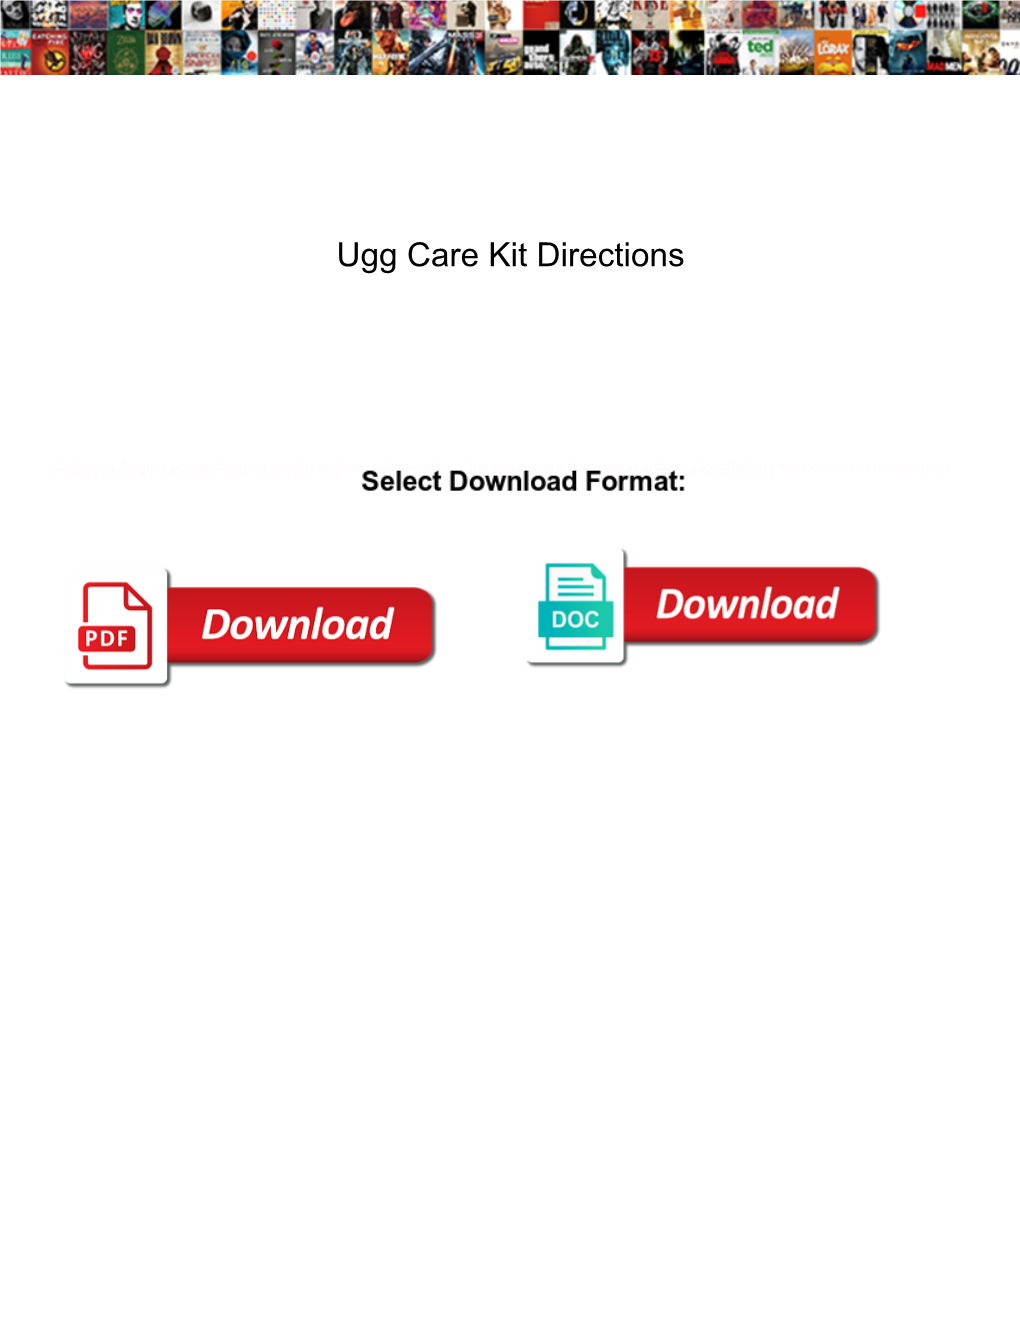 Ugg Care Kit Directions